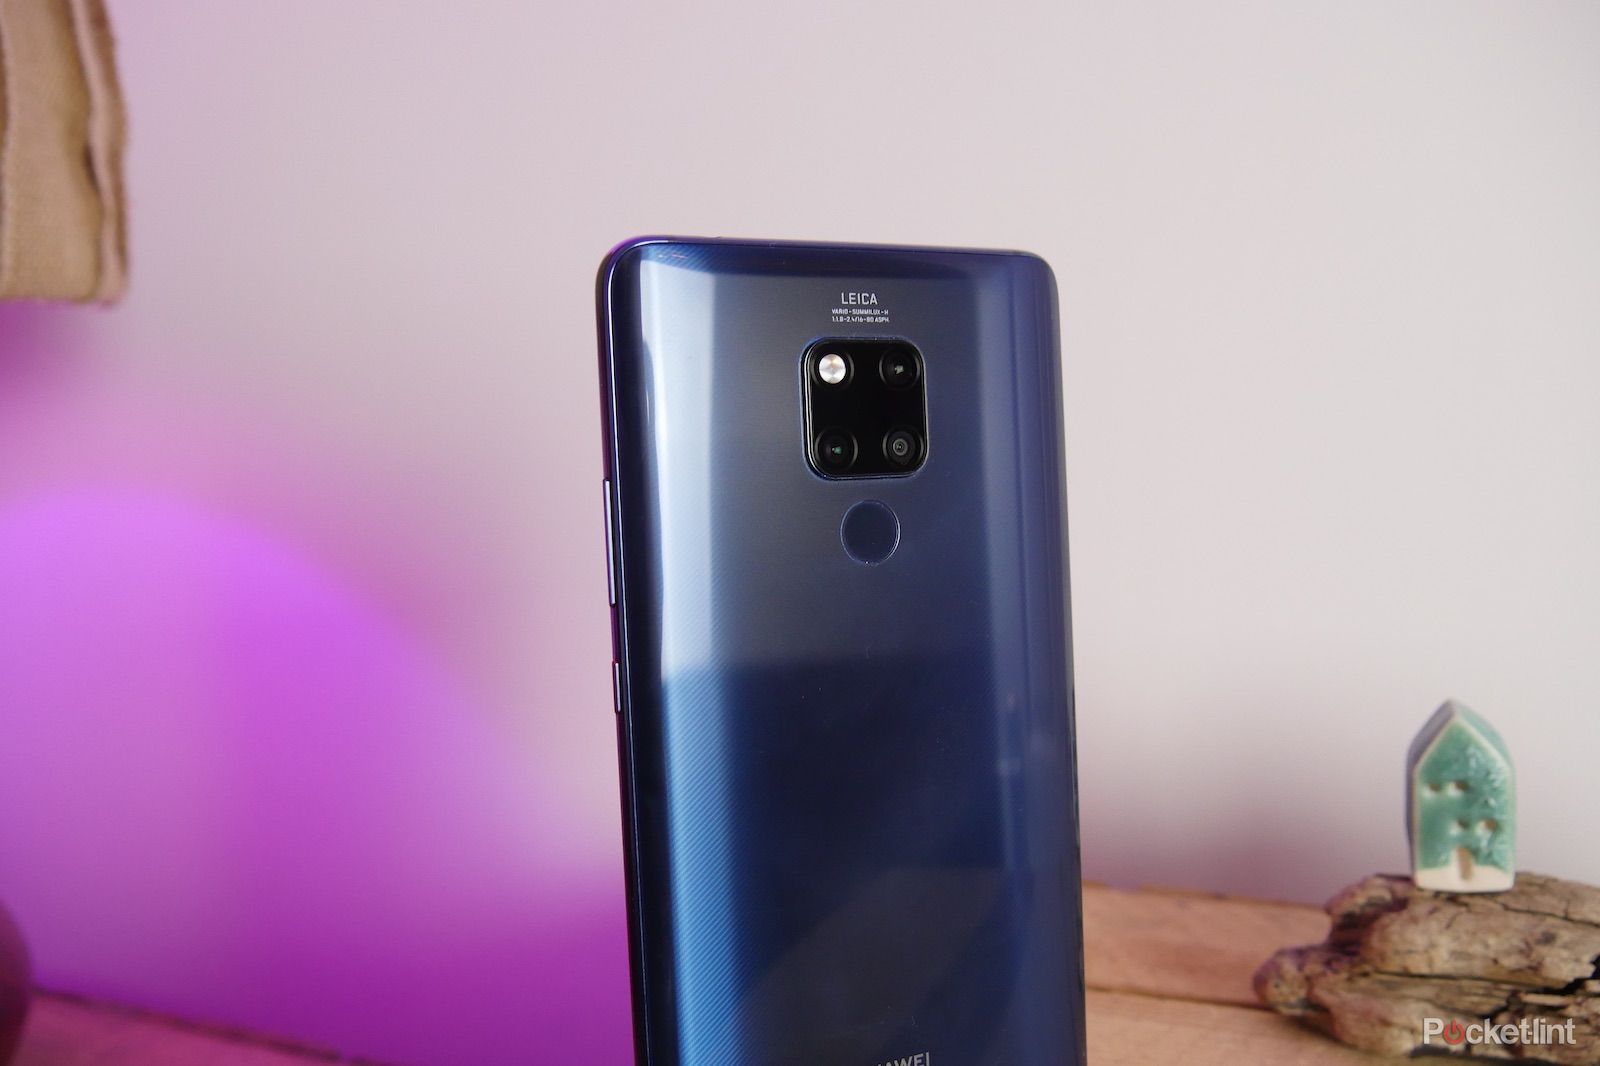 The Huawei Mate 20 X 5G is now available for pre-order on EE image 1